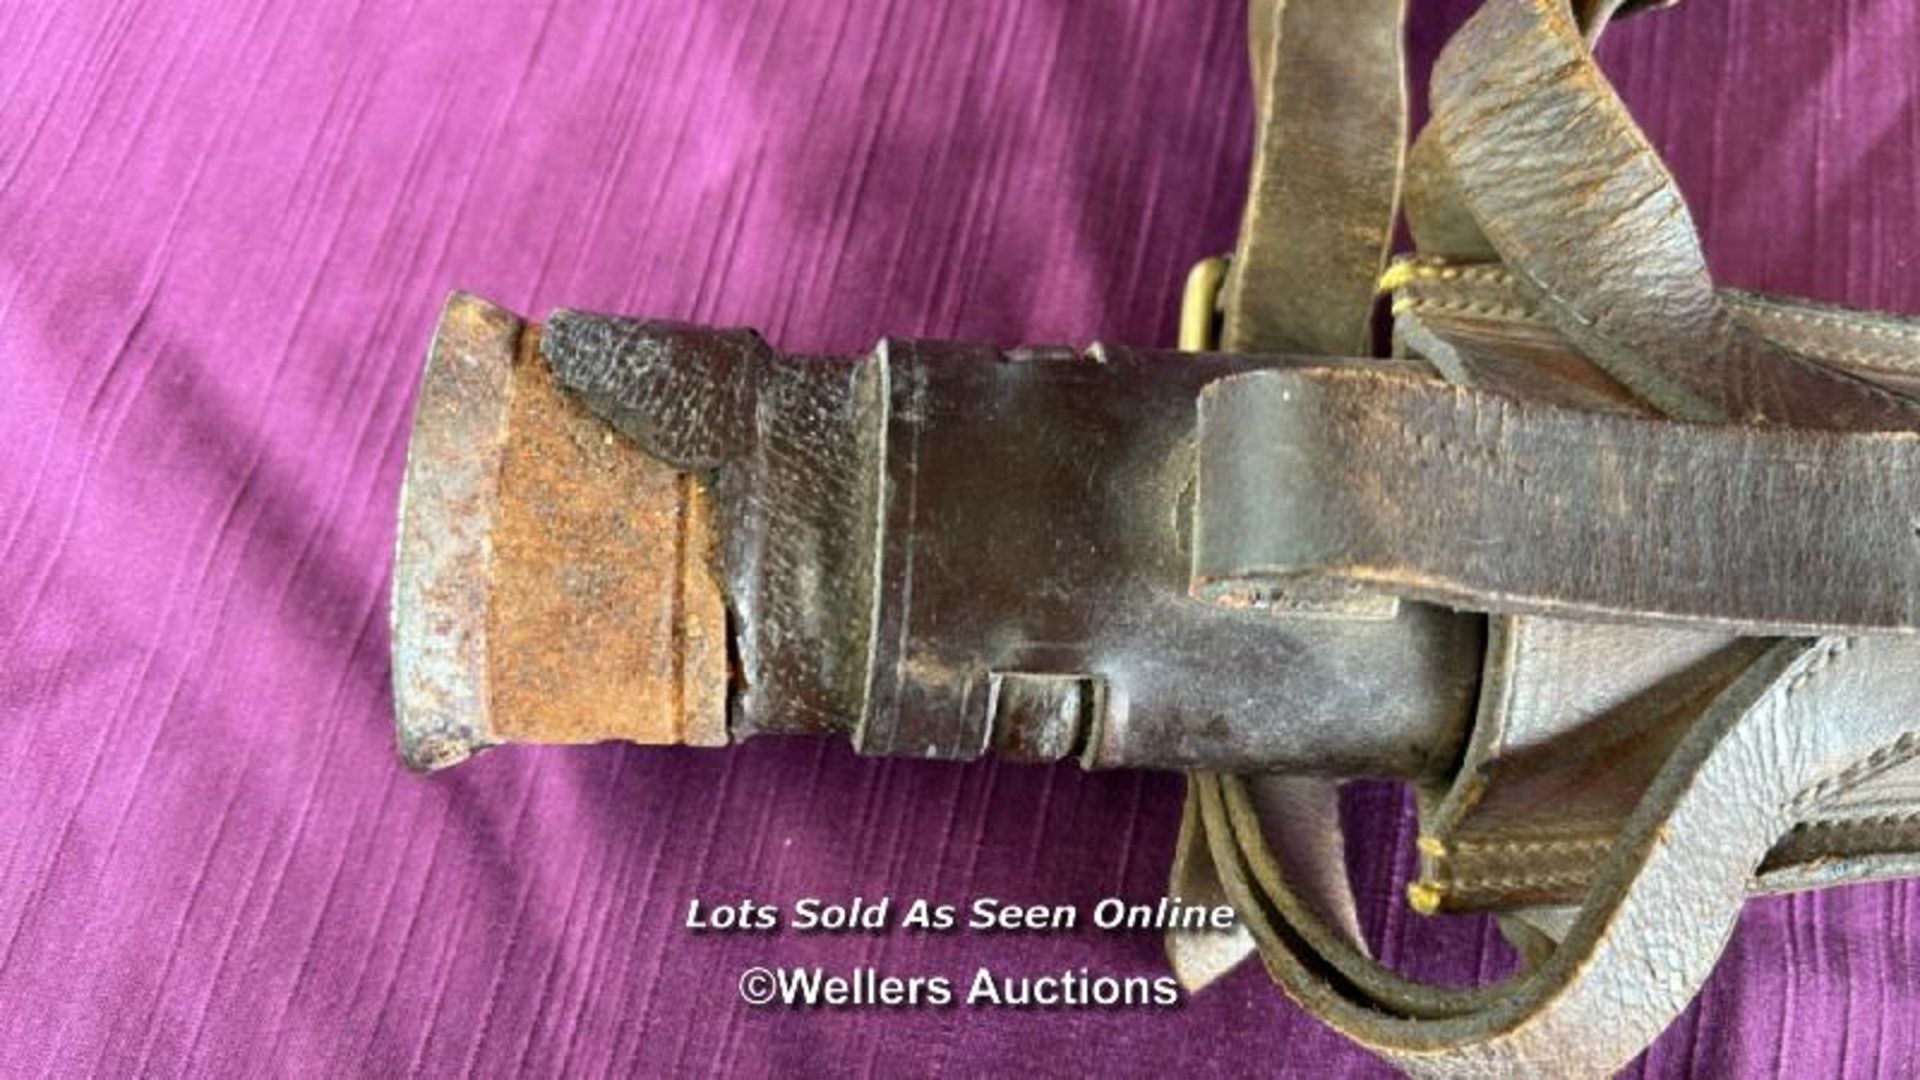 ANTIQUE INFANTRY OFFICERS SWORD WITH LEATHER SCABBARD, LENGTH 99CM - Image 12 of 12